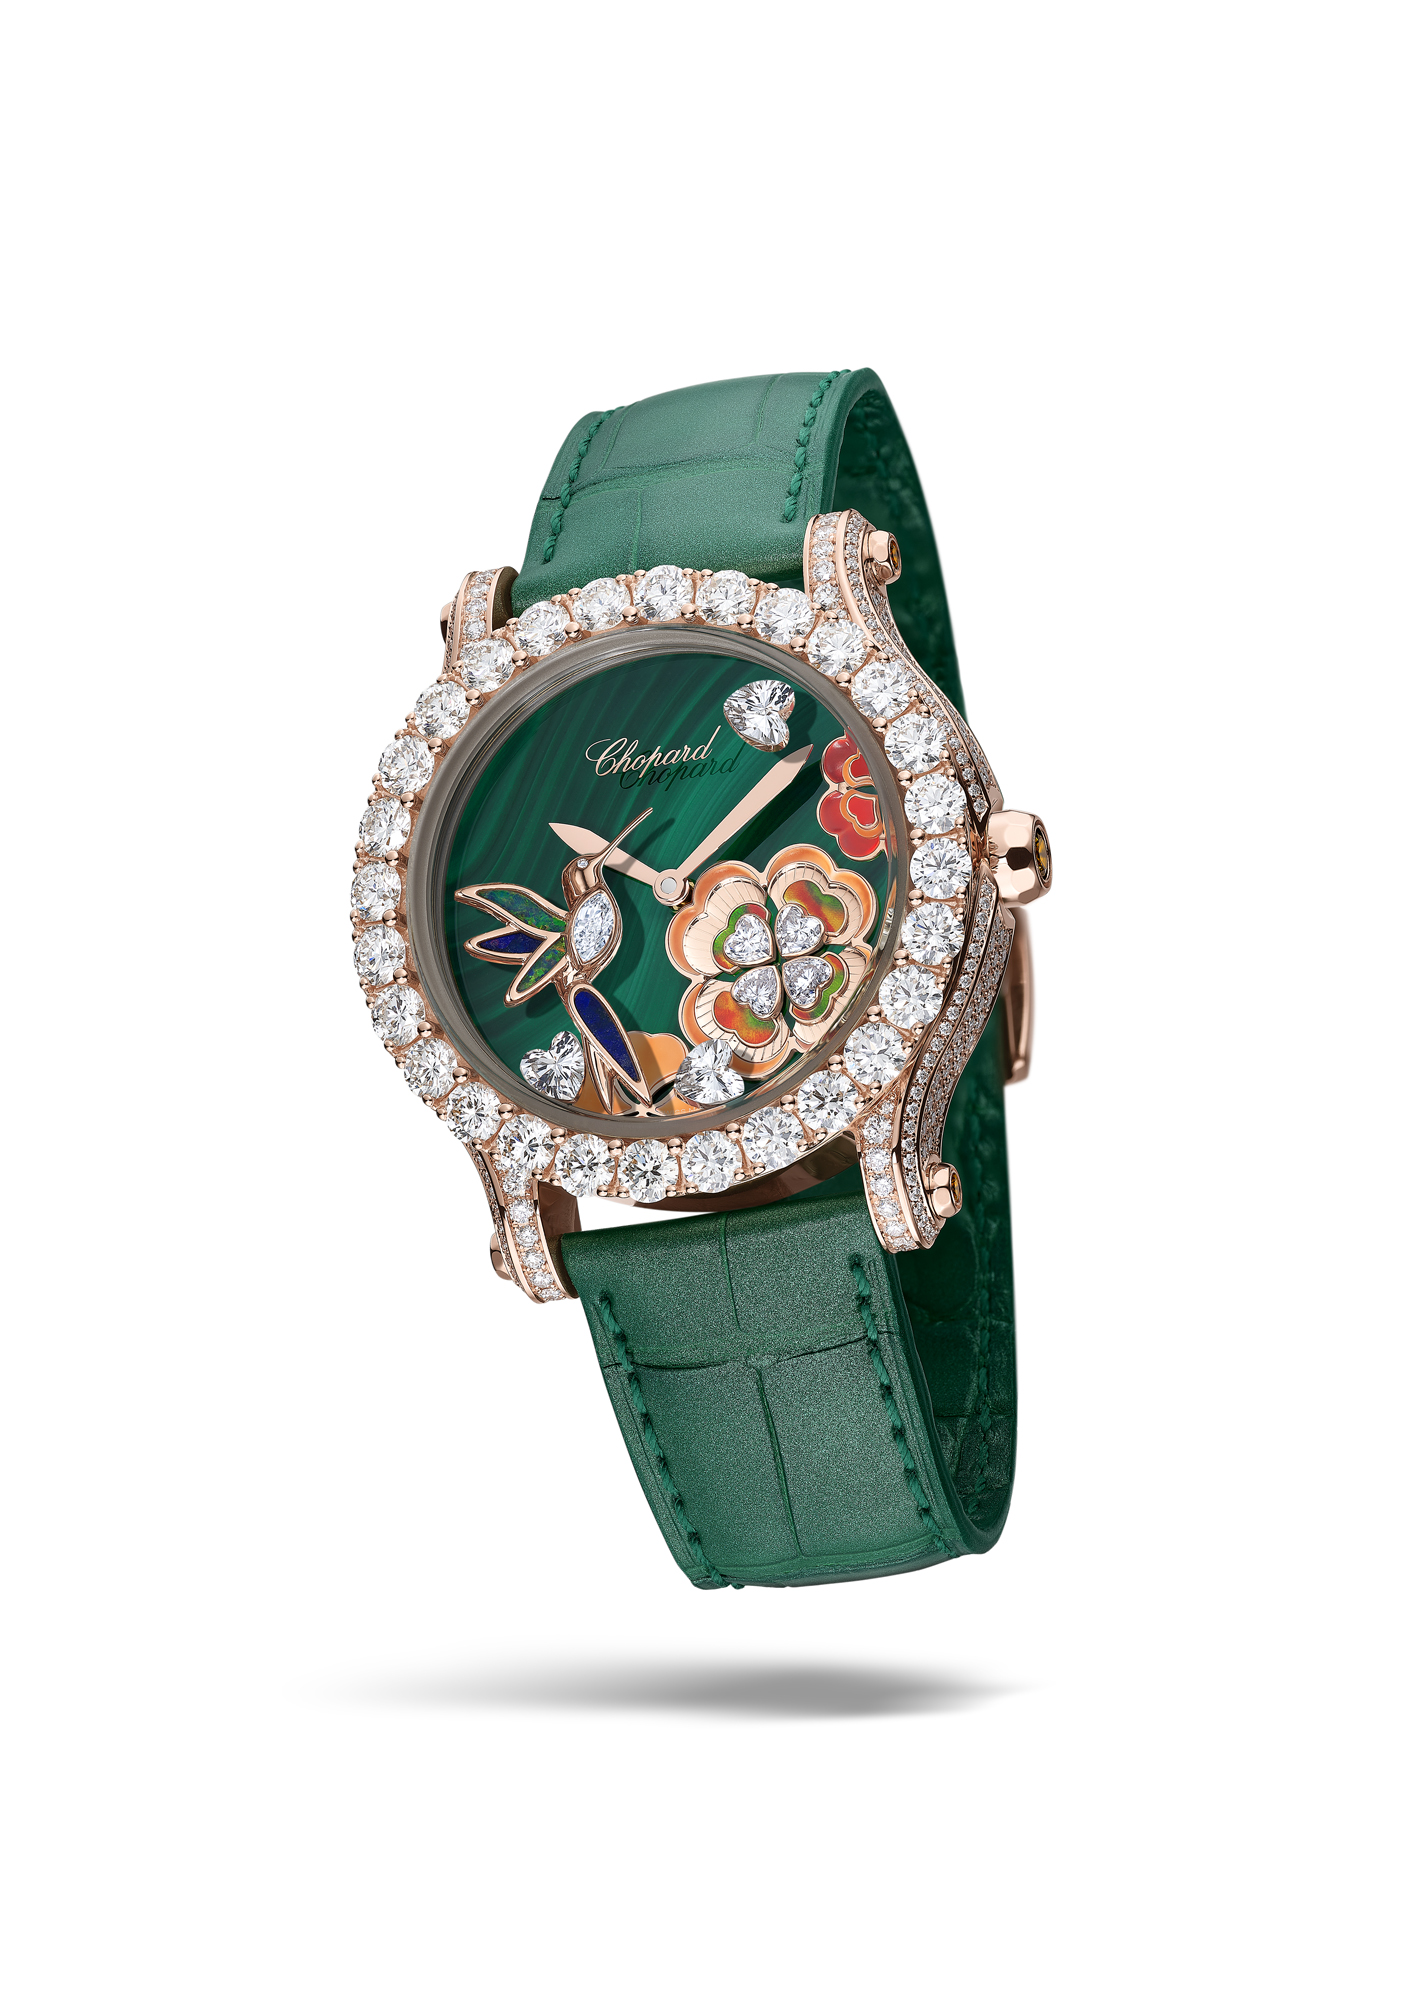 År Medic sej Chopard&#039;s timepieces puts gems in life at watches and wonders 2022